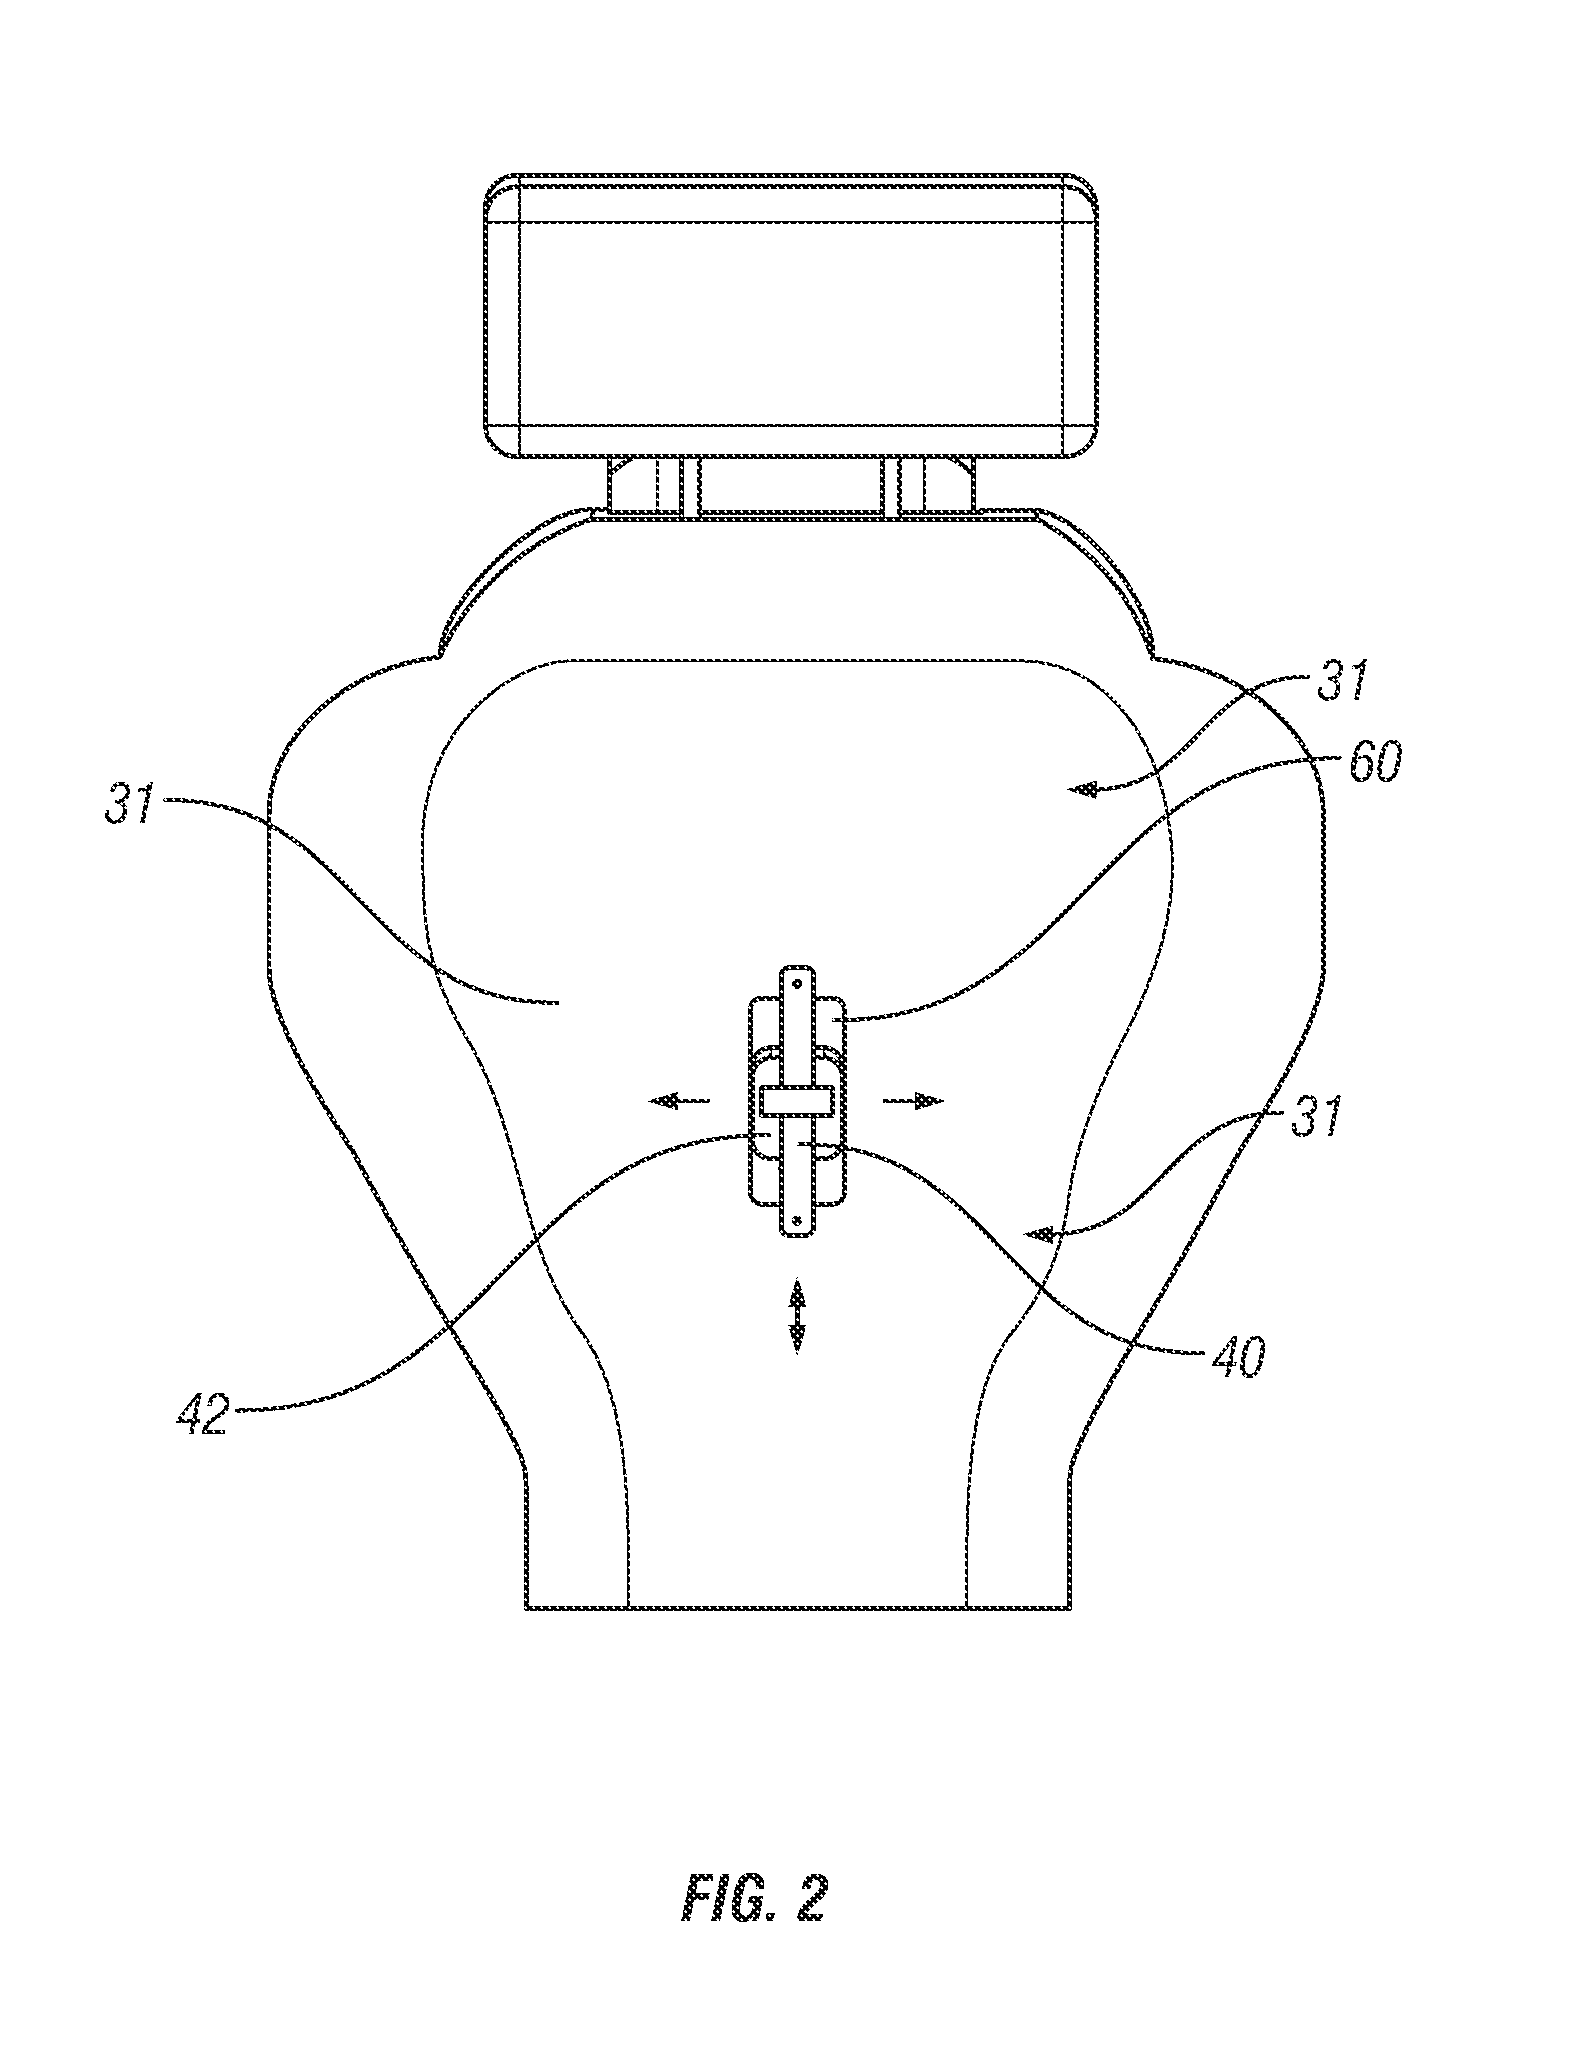 Apparatus and method for facilitating or enhancing a person's breathing